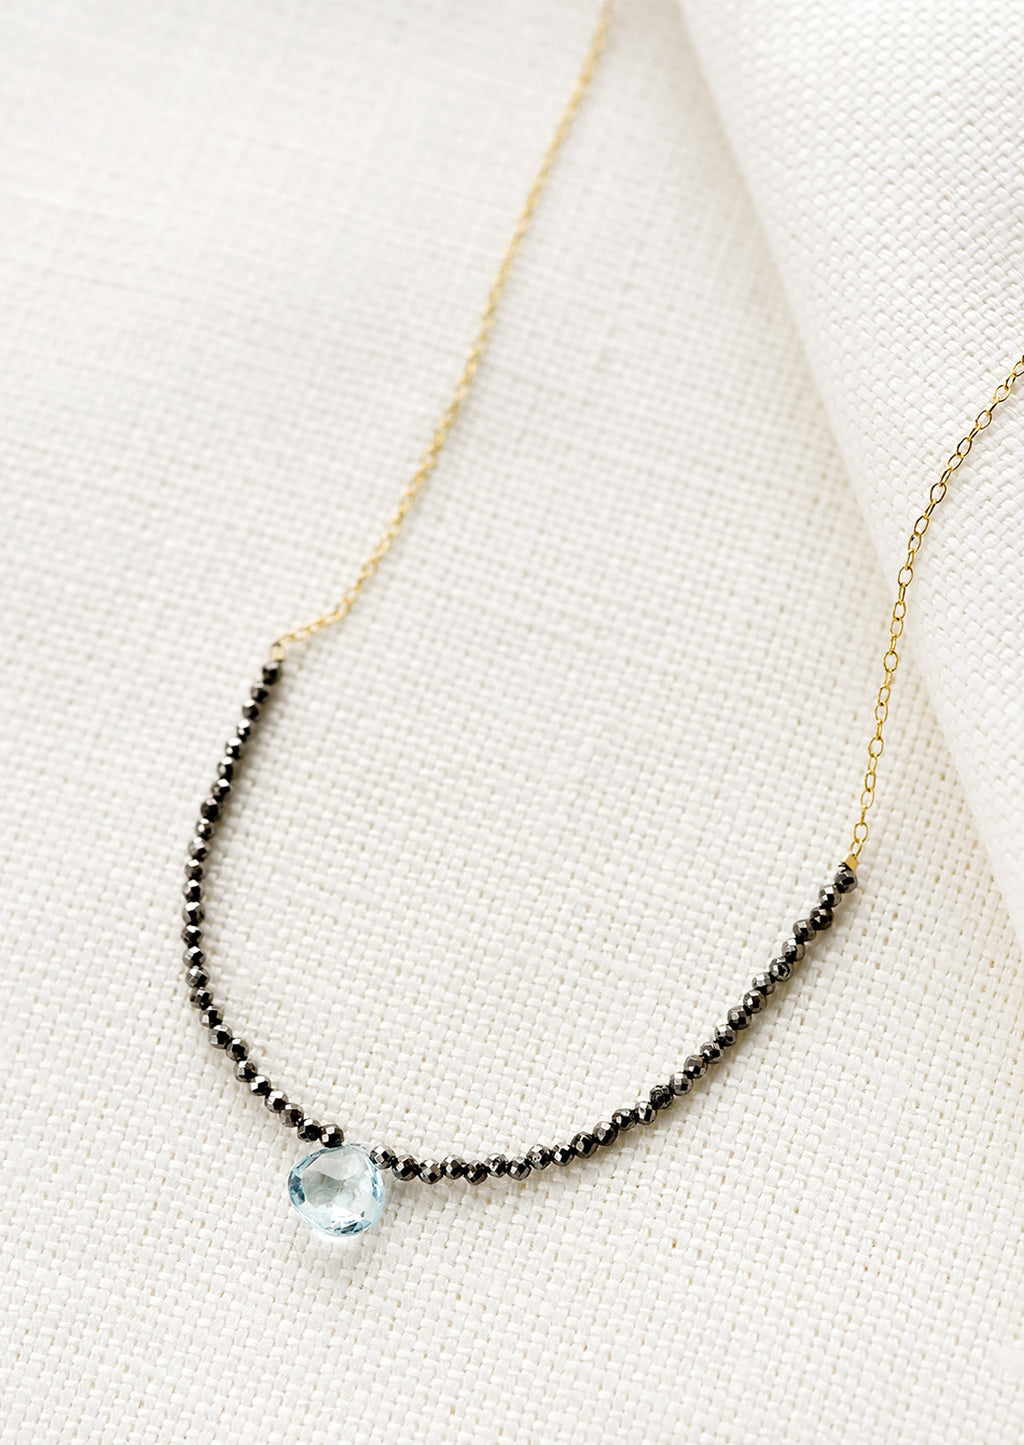 Pyrite / Blue Topaz: A beaded necklace with small pyrite beads and blue topaz teardrop.